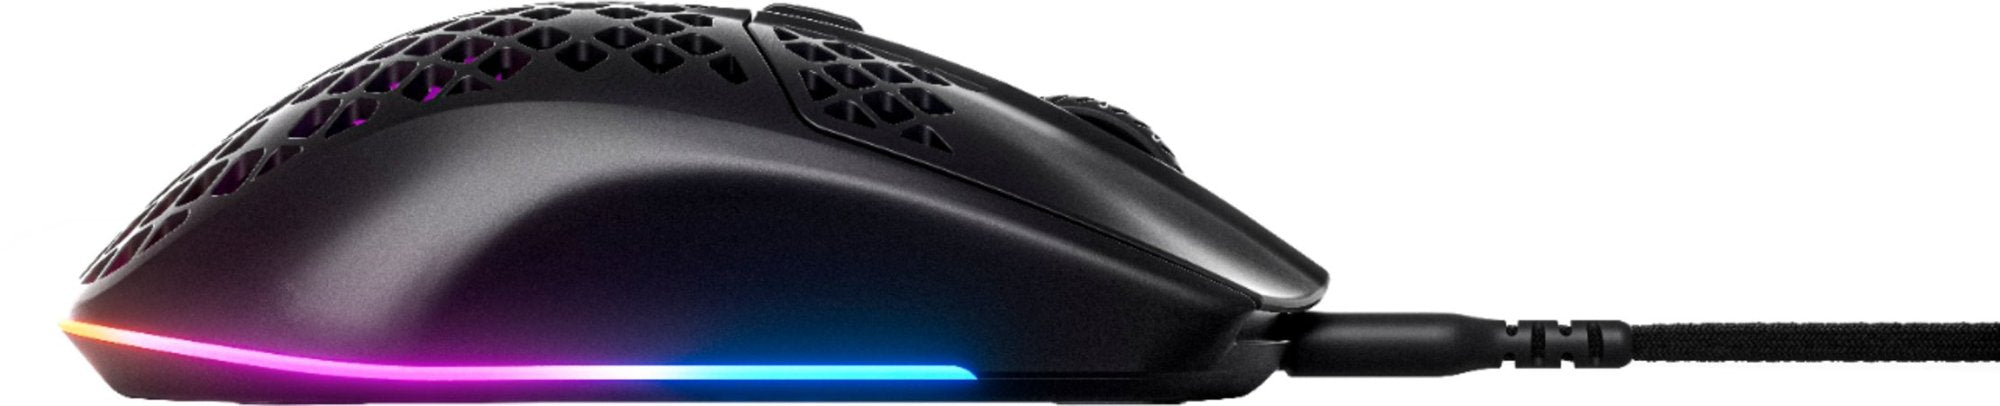 SteelSeries Aerox 3 Lightweight Wired Optical Gaming Mouse